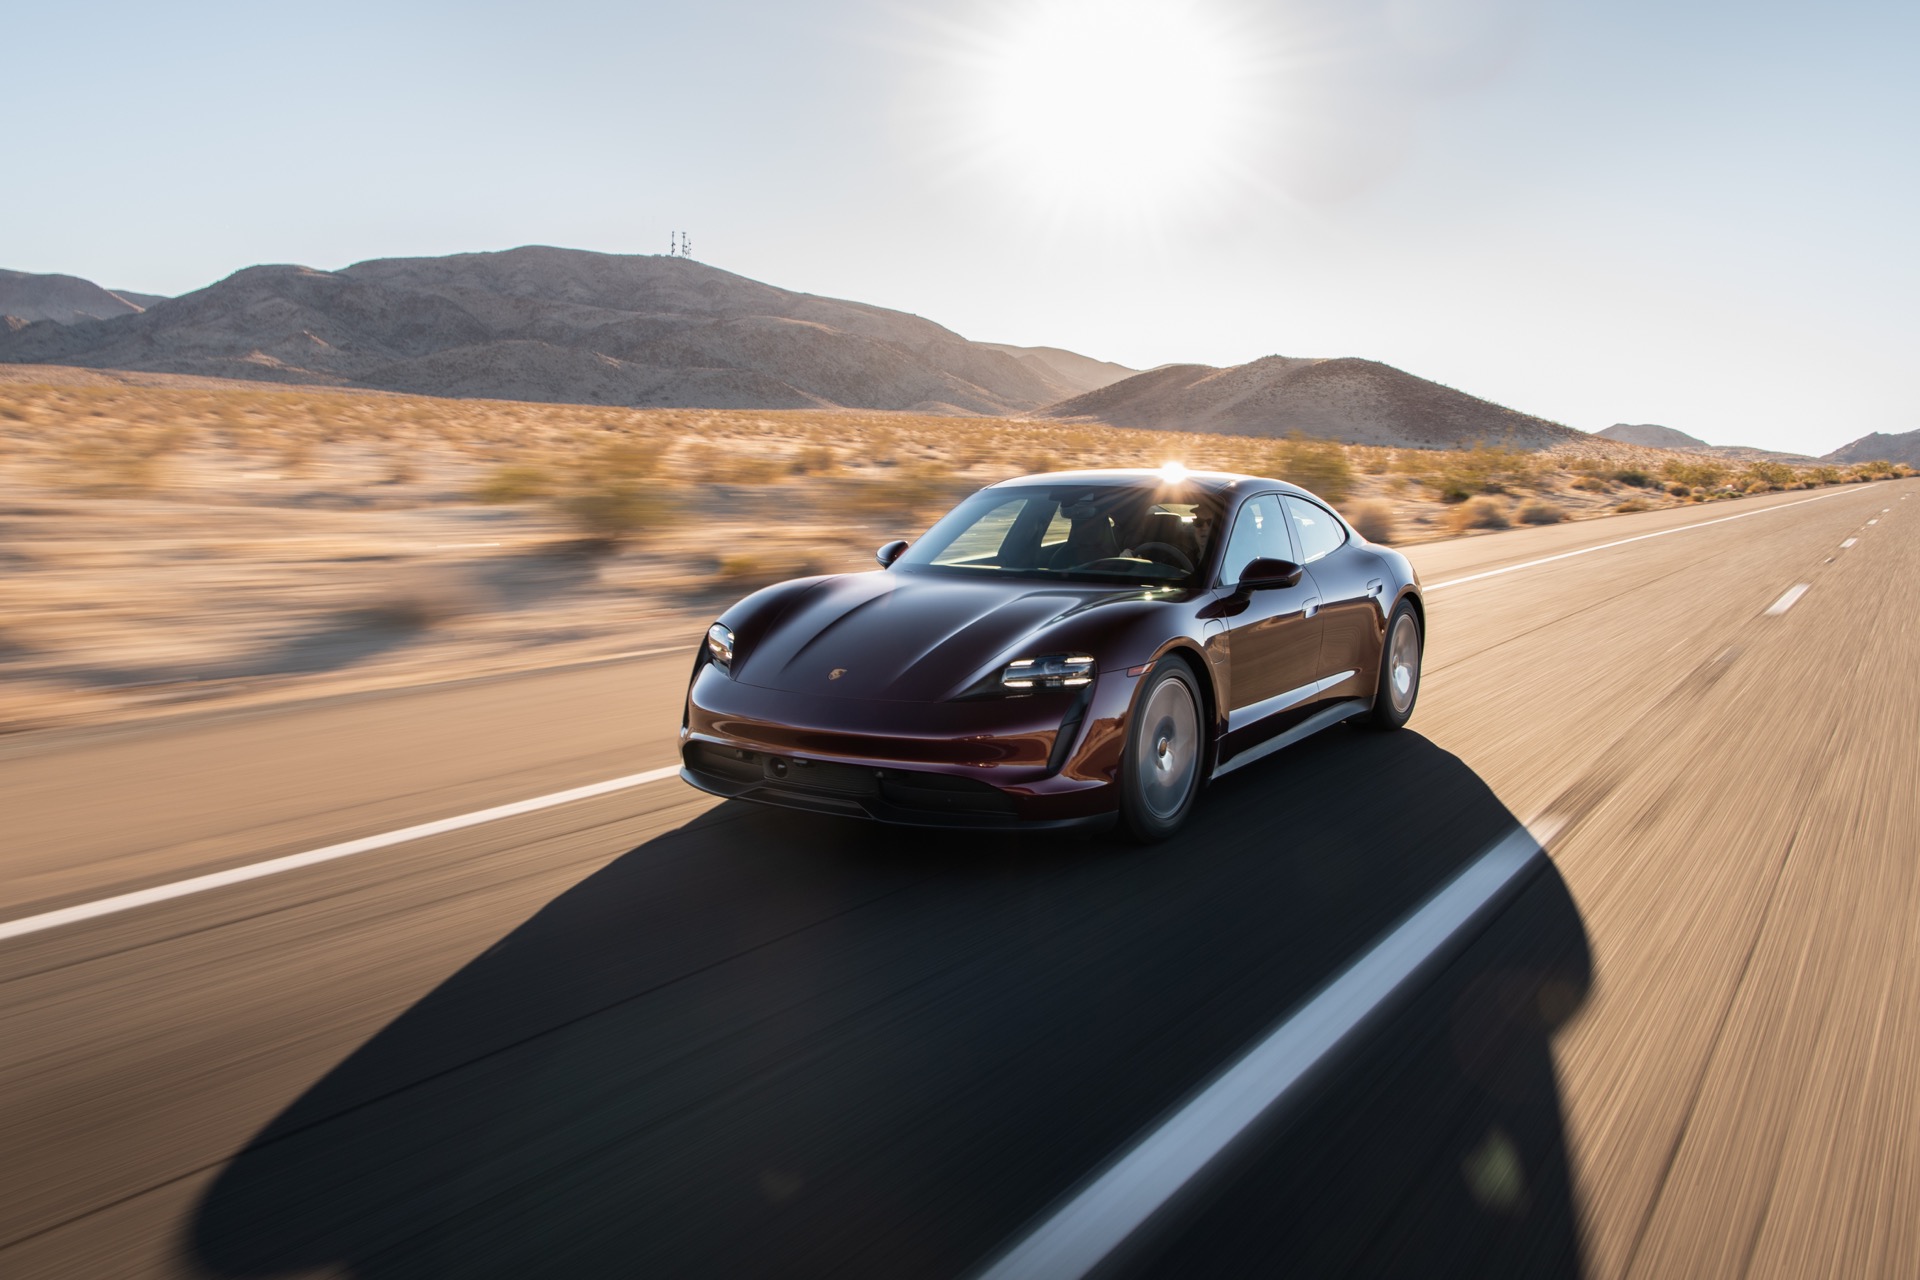 Porsche Taycan coast-to-coast record for least charging time